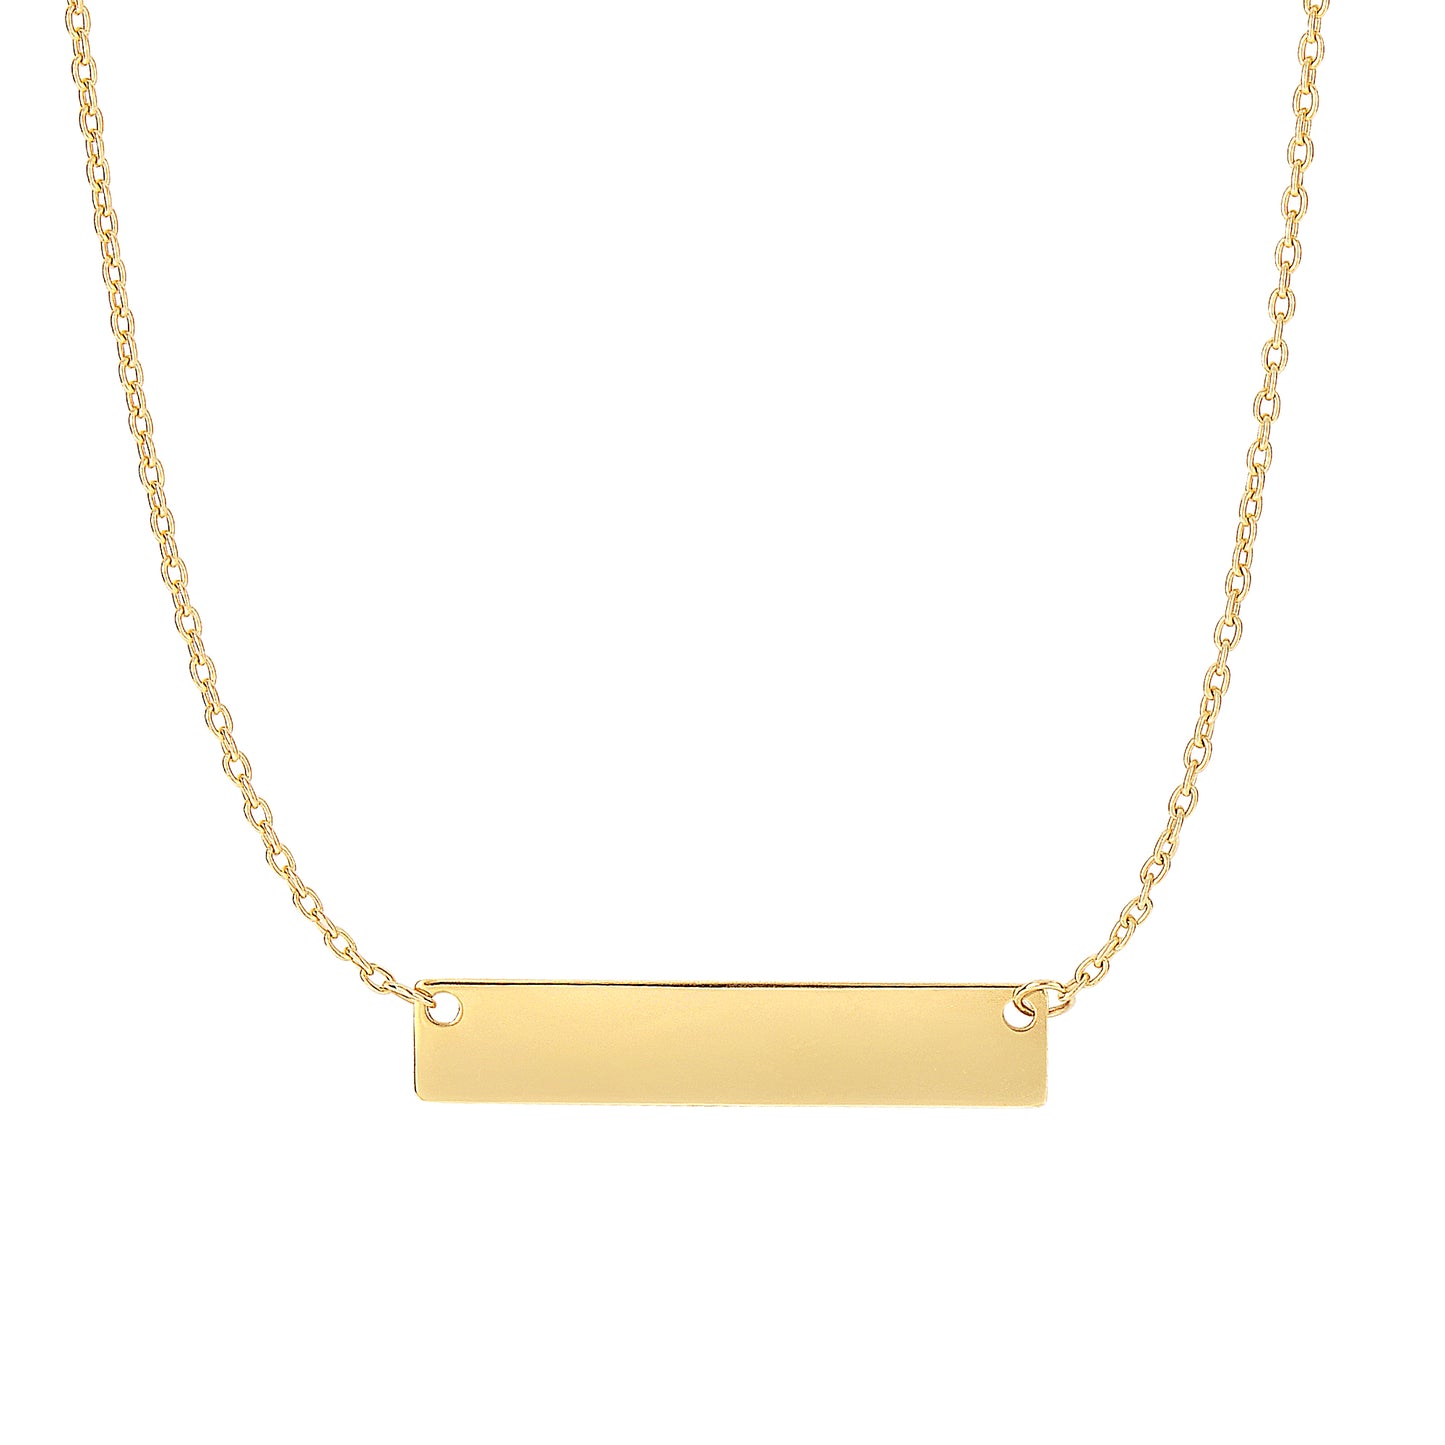 14K Gold Small Polished Bar Necklace